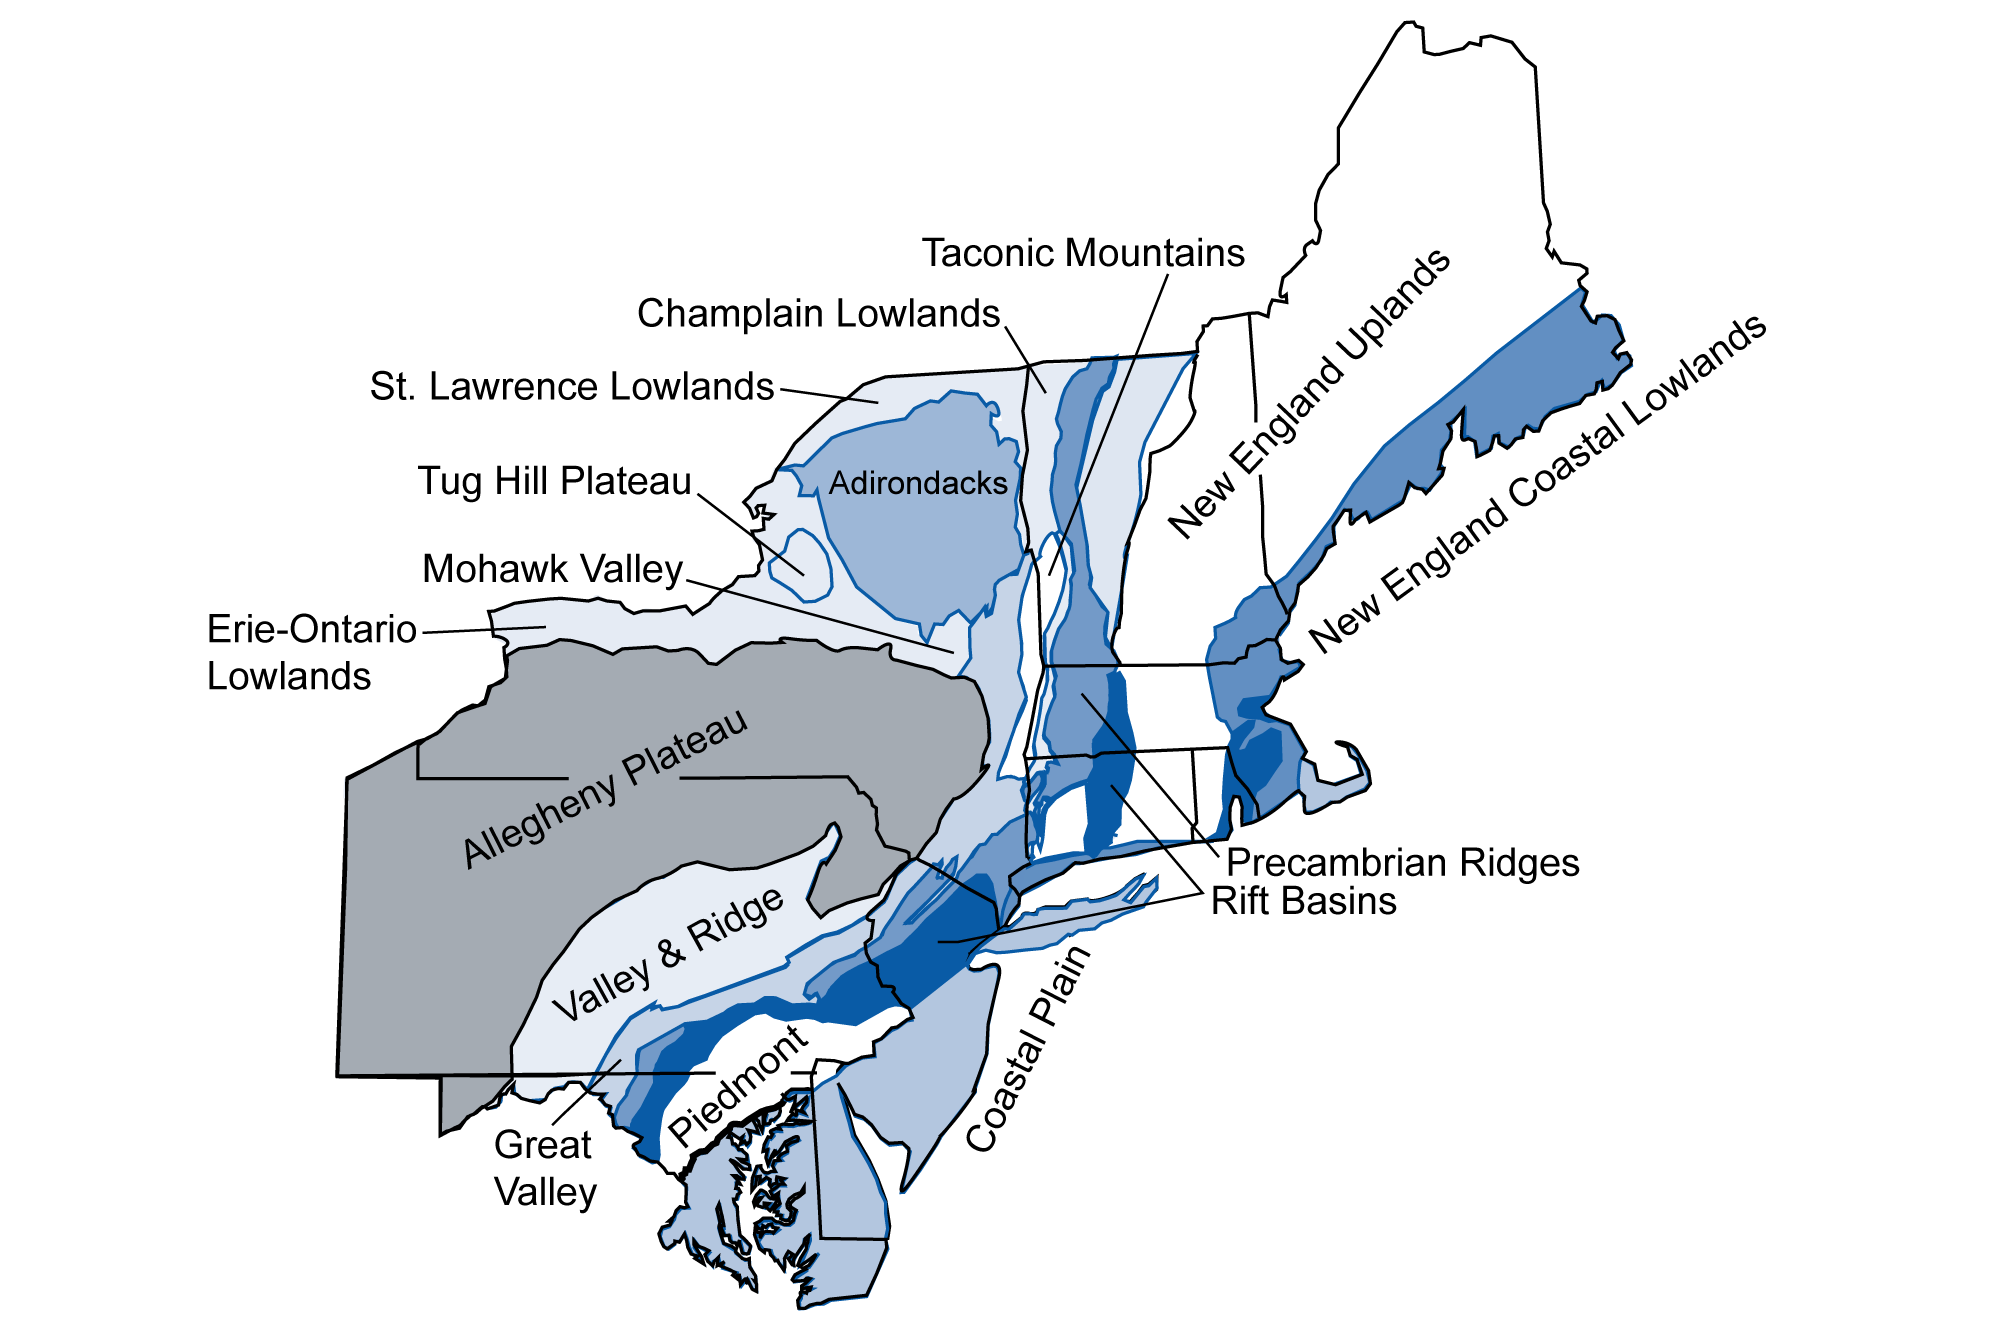 Map showing the major physiographic regions of the northeastern United States.